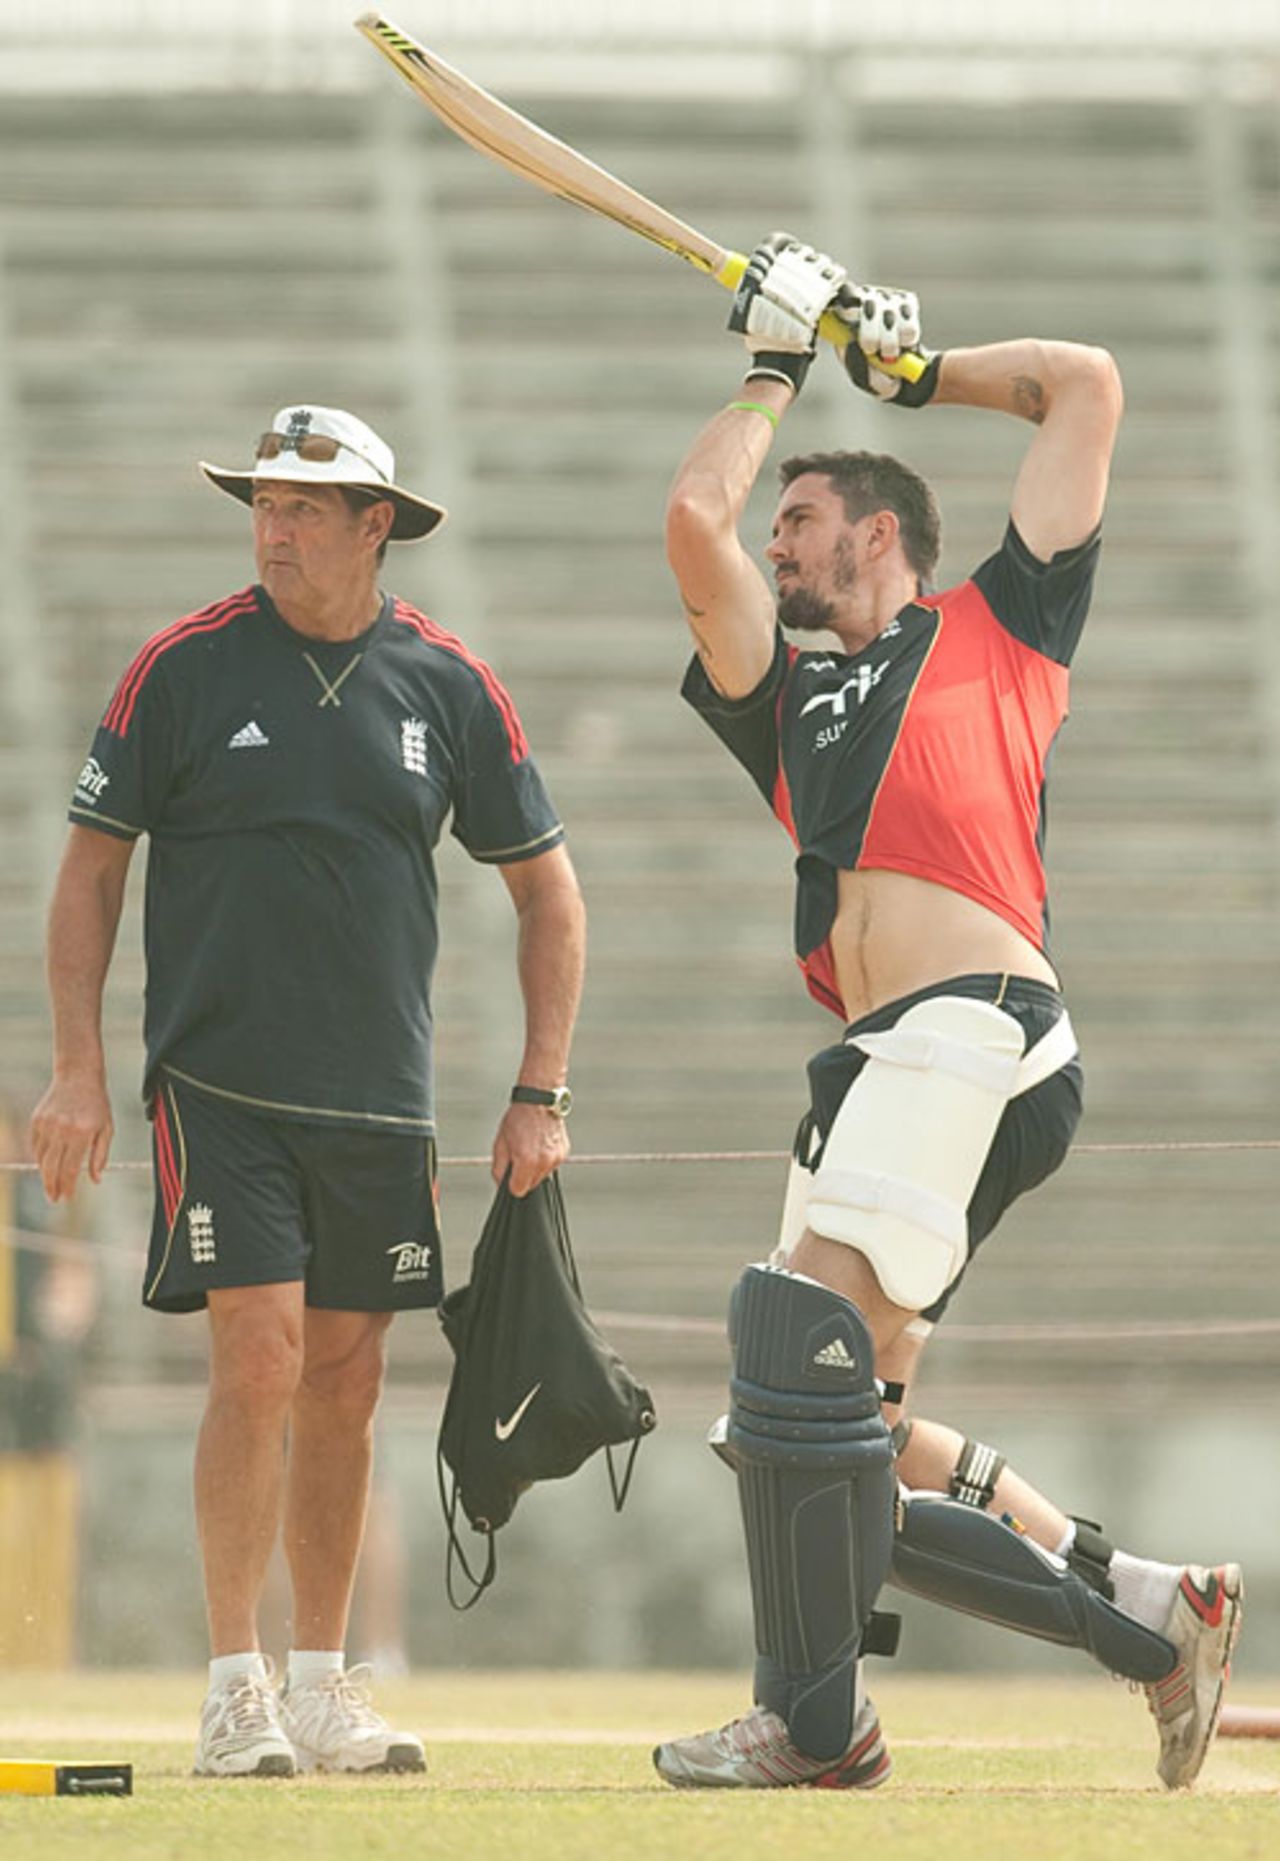 Kevin Pietersen aims an expansive drive in practice while Graham Gooch watches on, Fatullah, Bangladesh, February 24, 2010